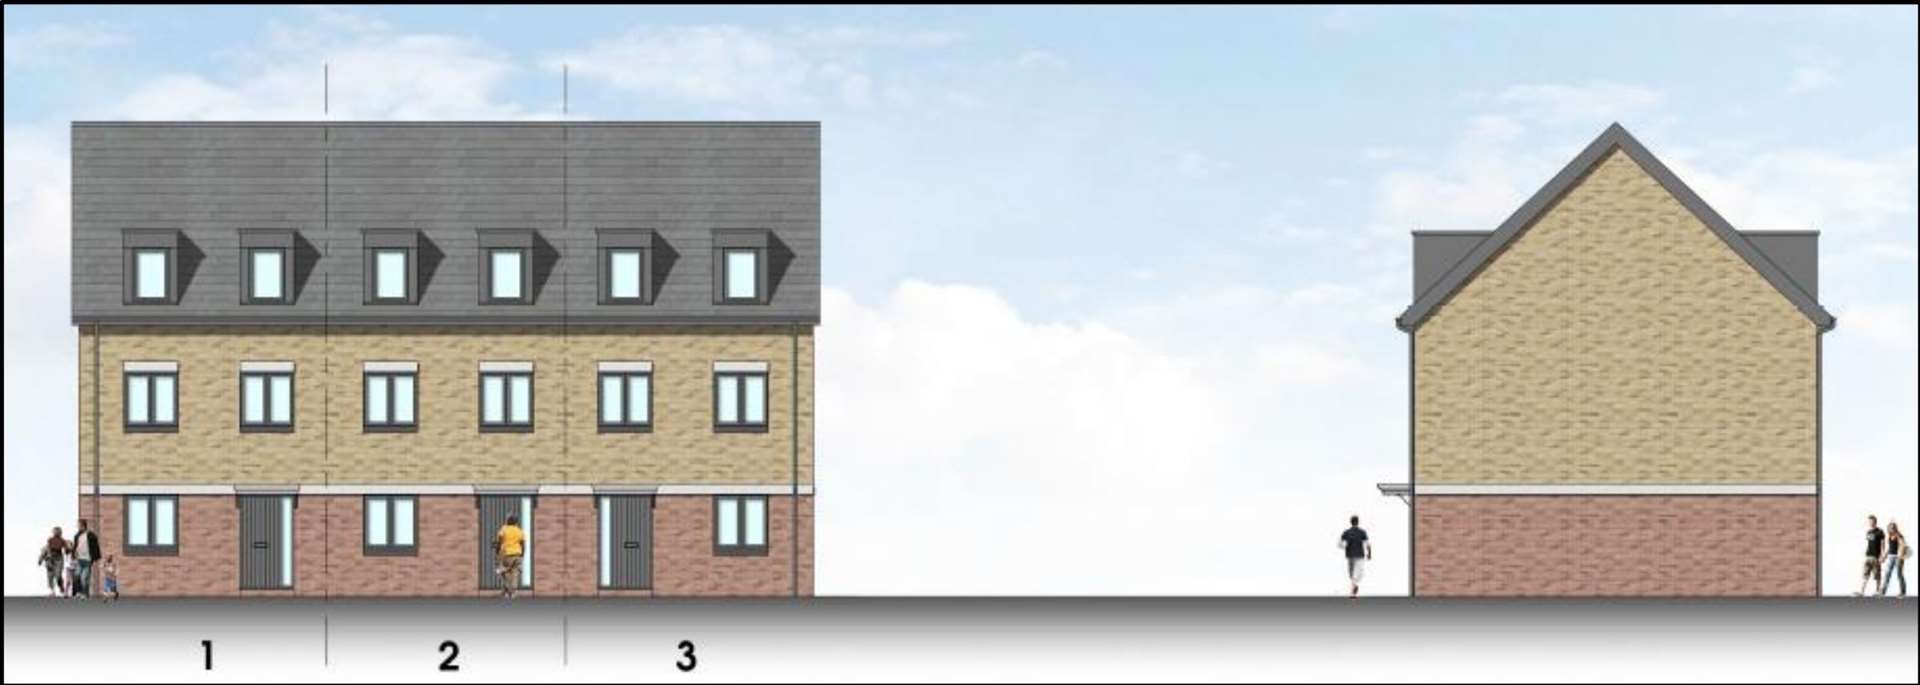 The proposals also include three four-storey houses